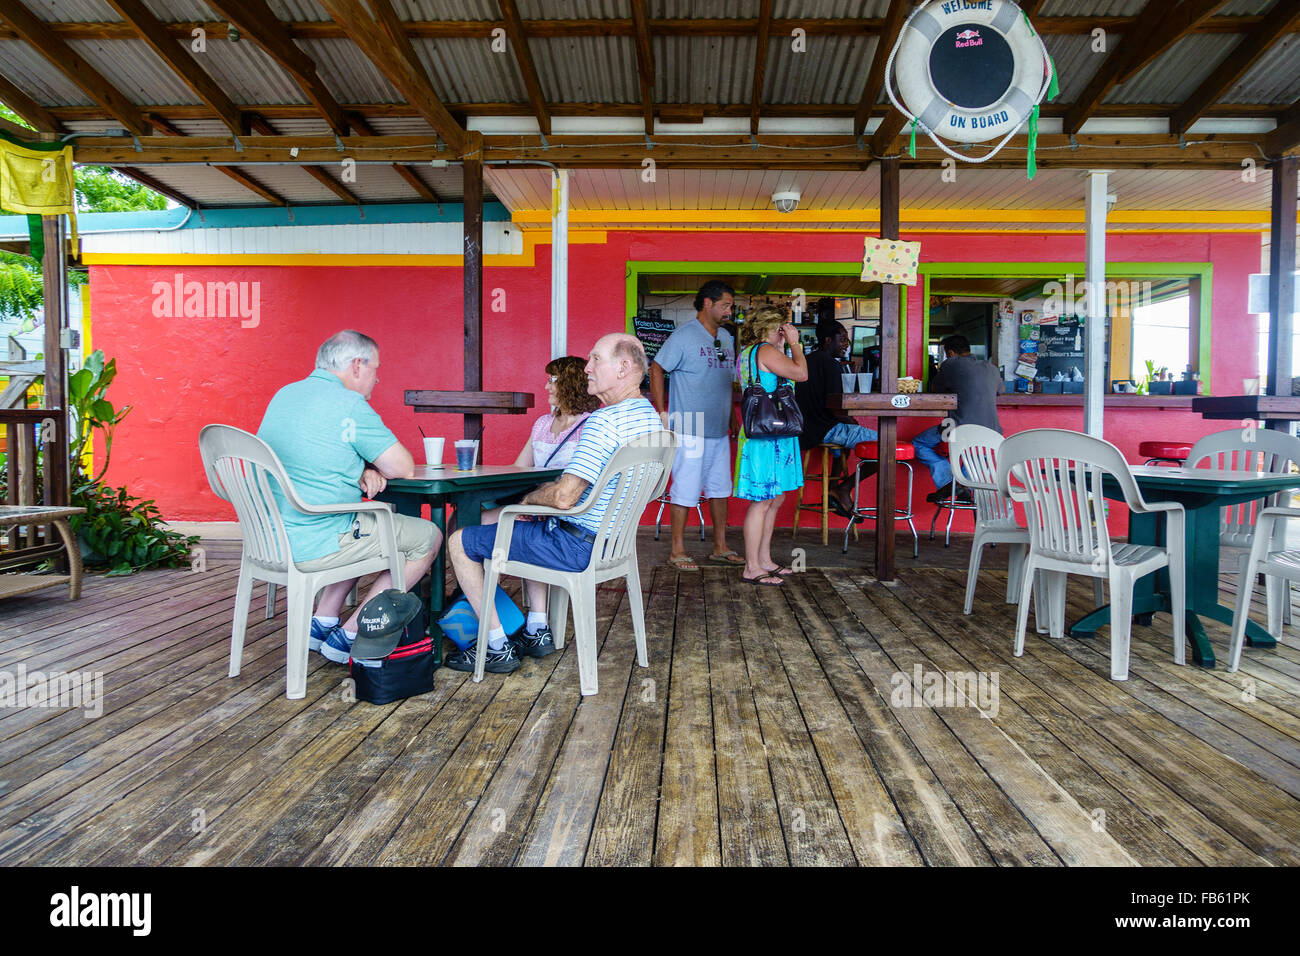 Customers at a table wait for food at a beachside cafe in Frederiksted, St. Croix, U.S. Virgin Islands. Stock Photo